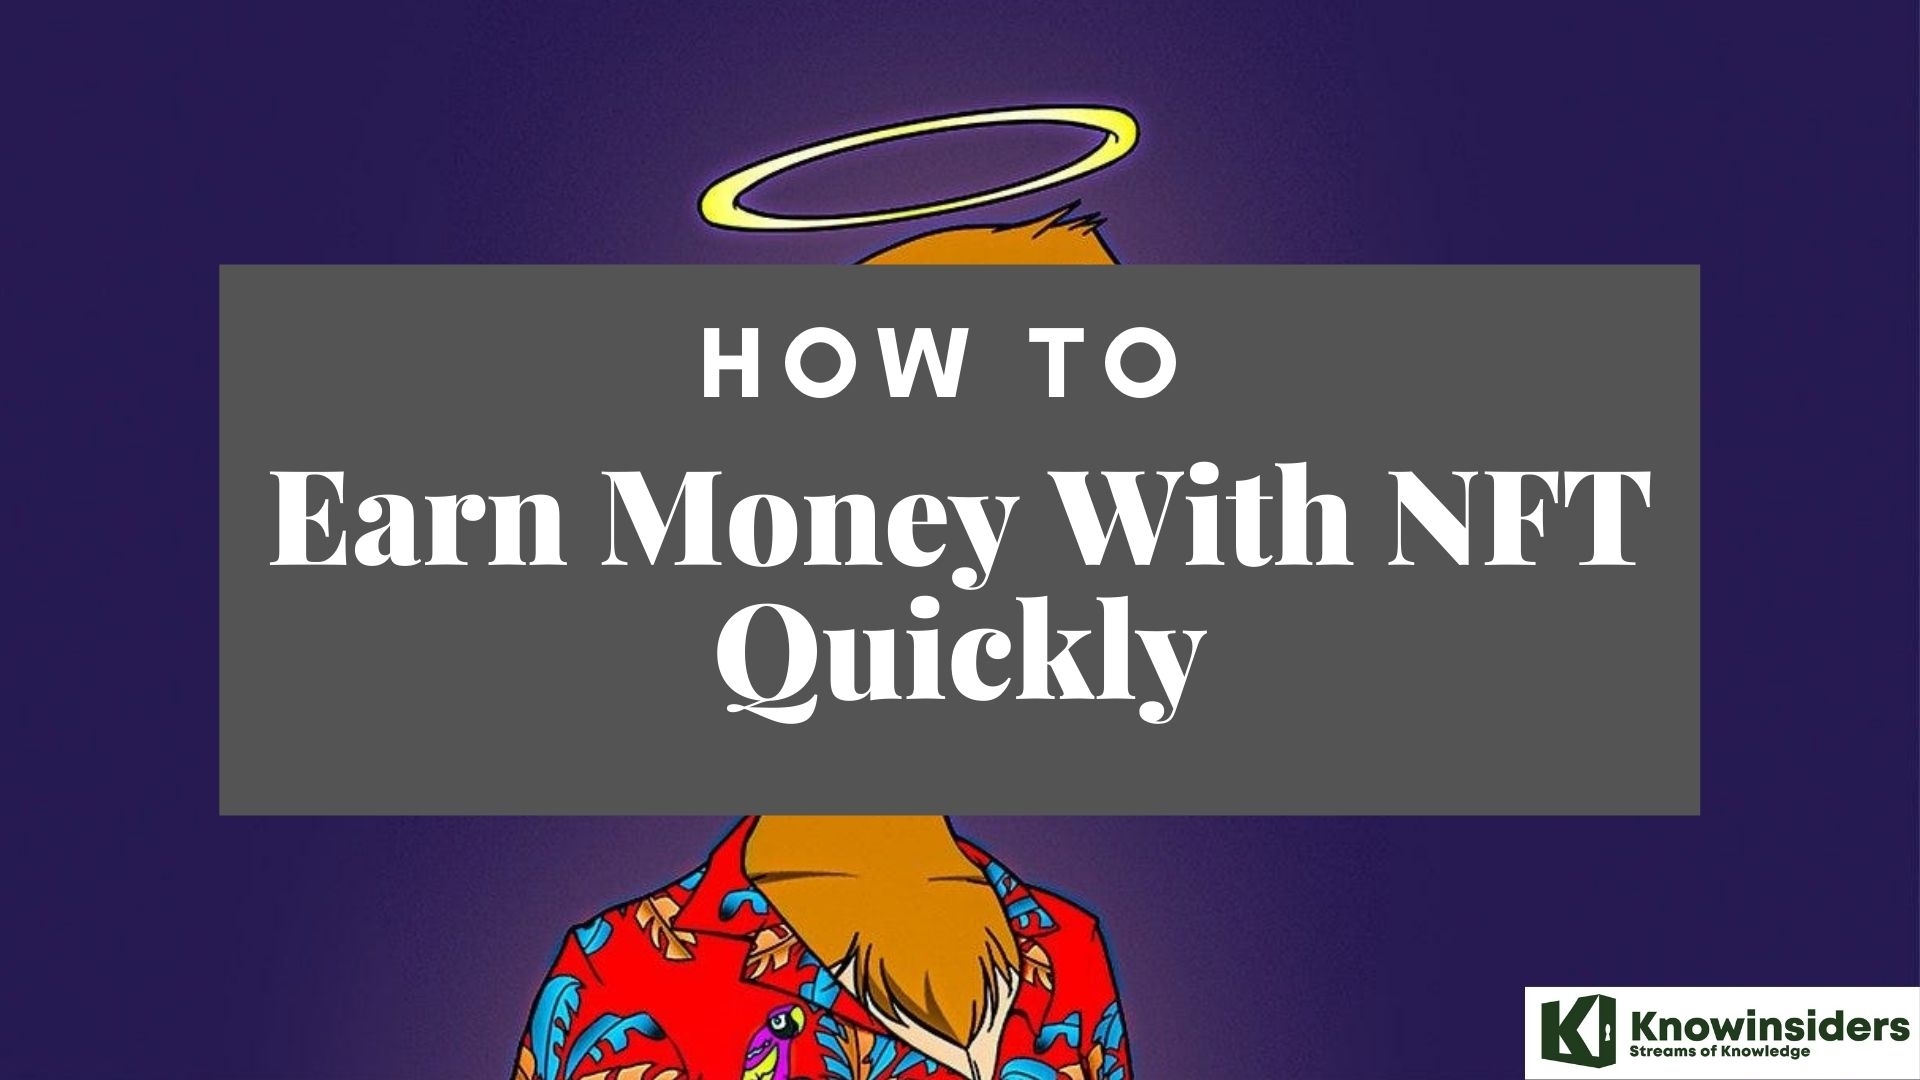 How To Earn Money With NFT Quickly in 2022/2023